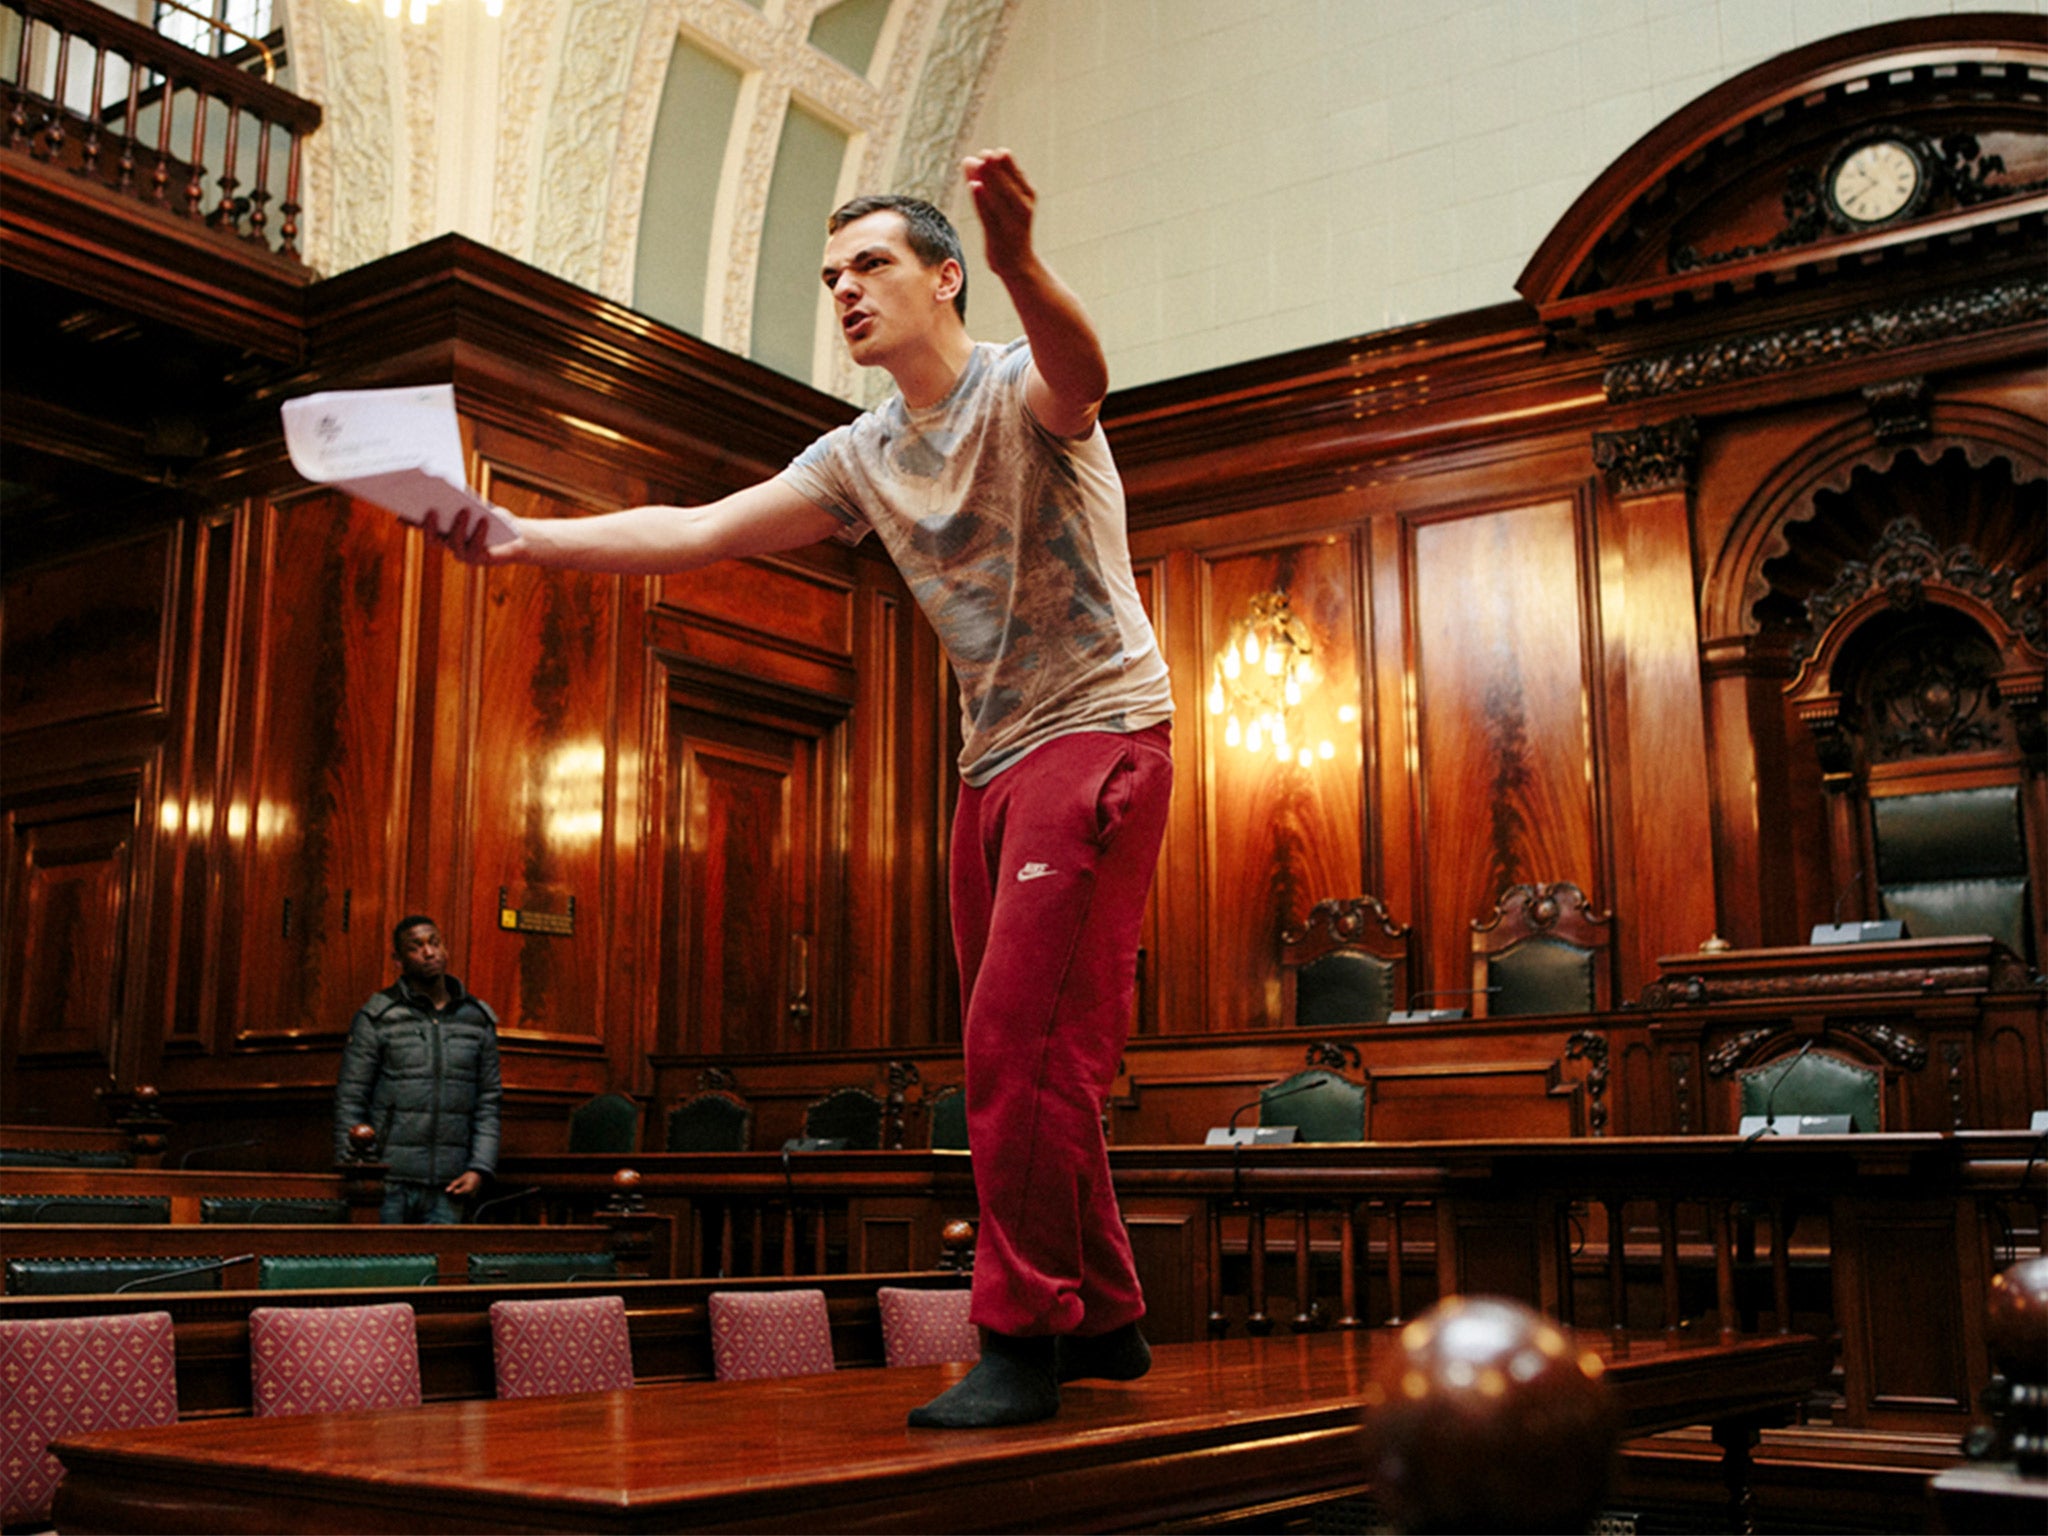 Common Wealth’s Cain Connelly rehearsing in Bradford council chambers this week